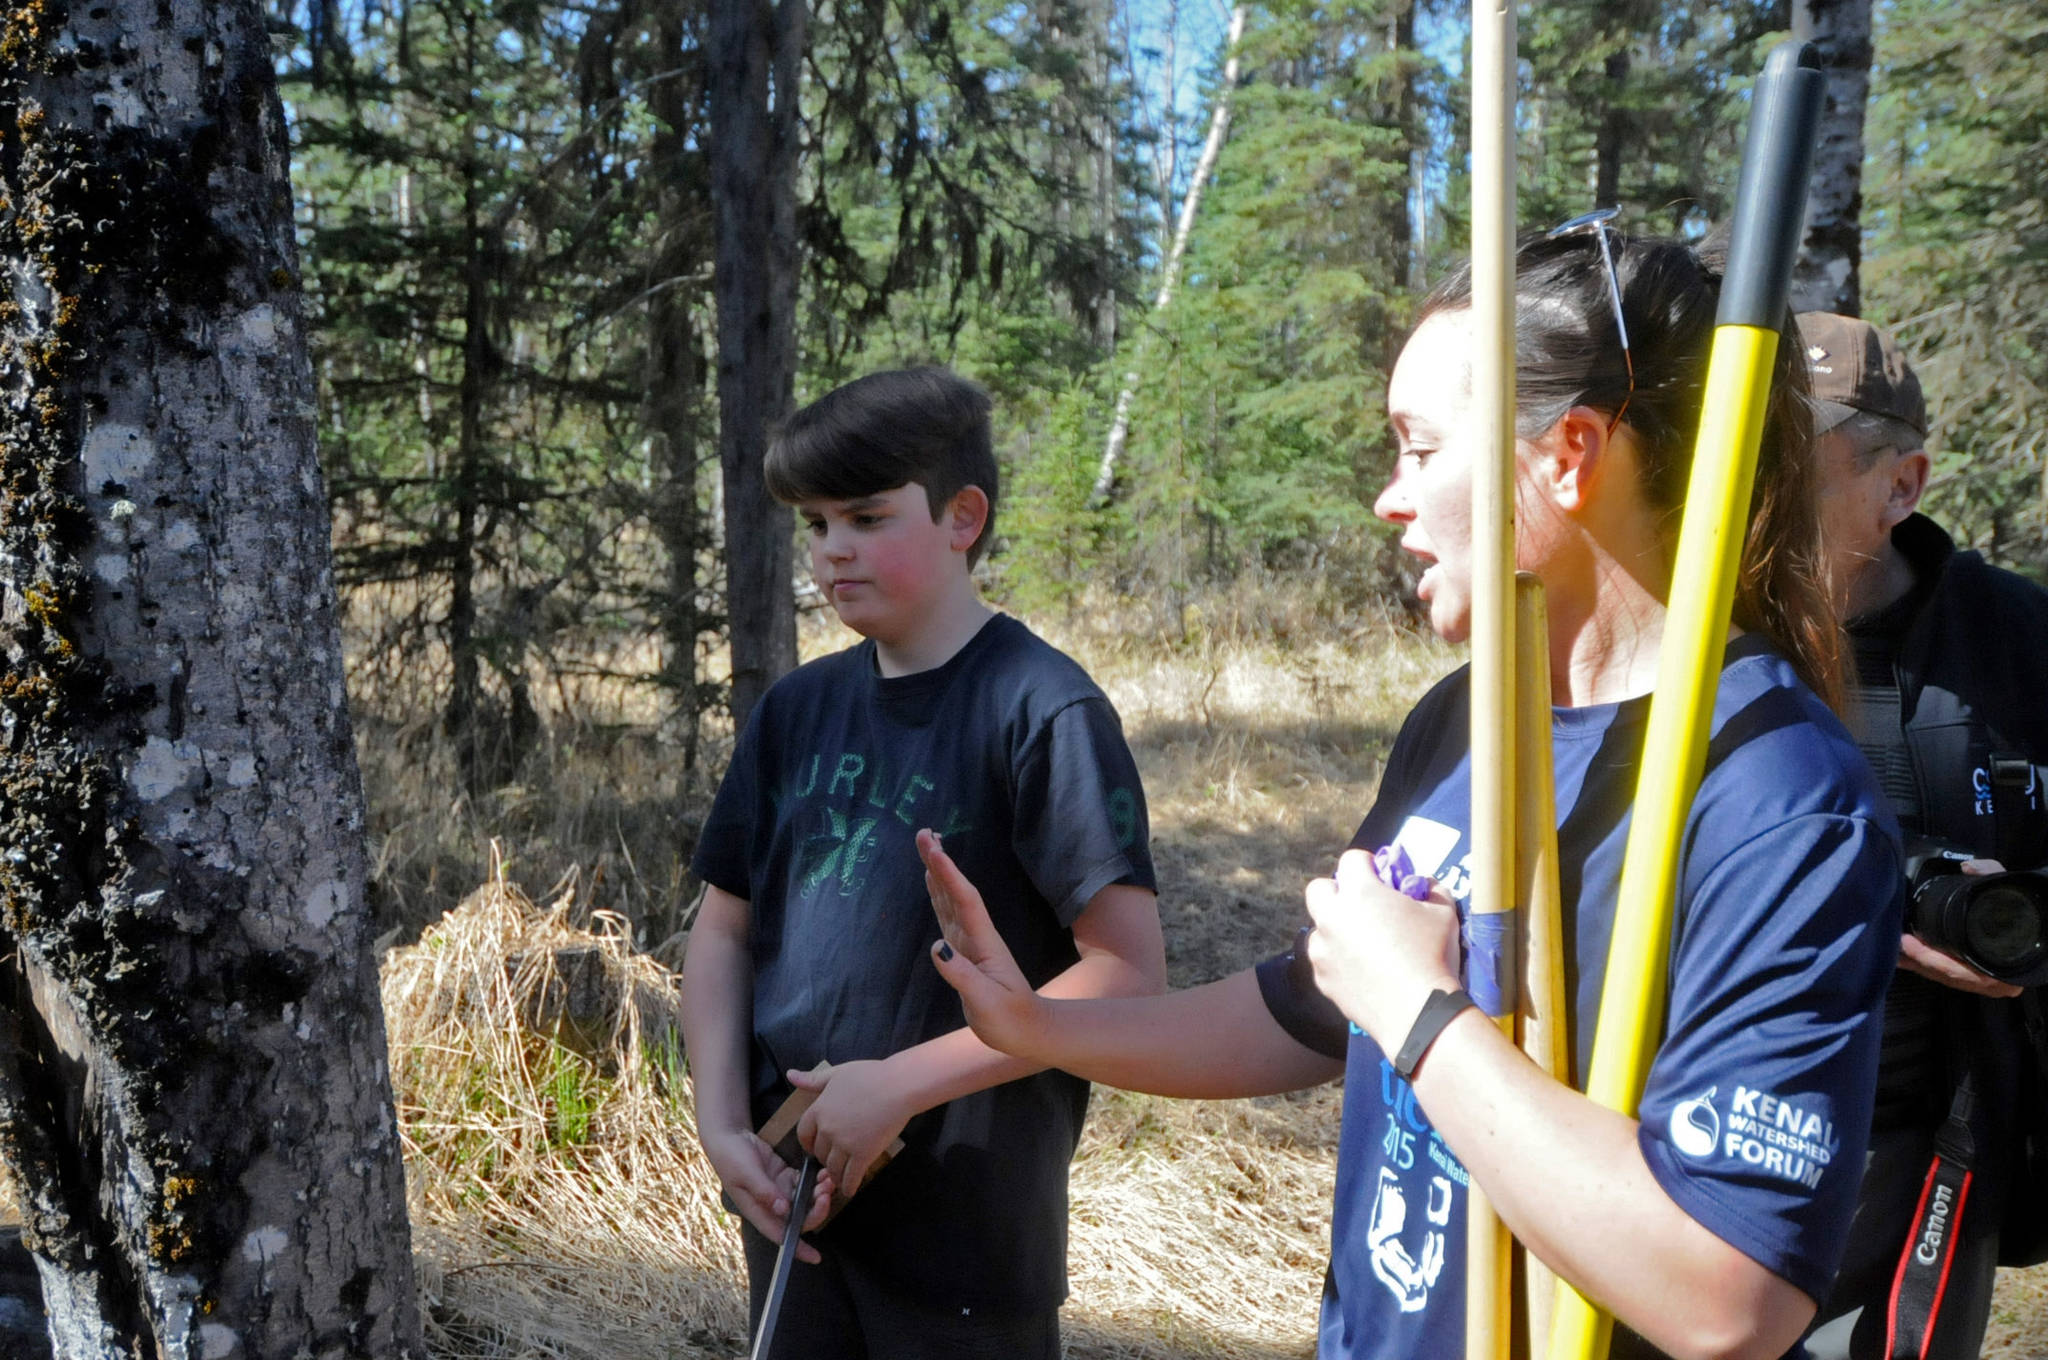 Jordan Hinz (left) askso for advice from Jen Hester (right) of the Kenai Watershed Forum to identify a black cottonwood tree on a trail near the school on Tuesday, May 22, 2018 in Kasilof, Alaska. (Photo by Elizabeth Earl/Peninsula Clarion)